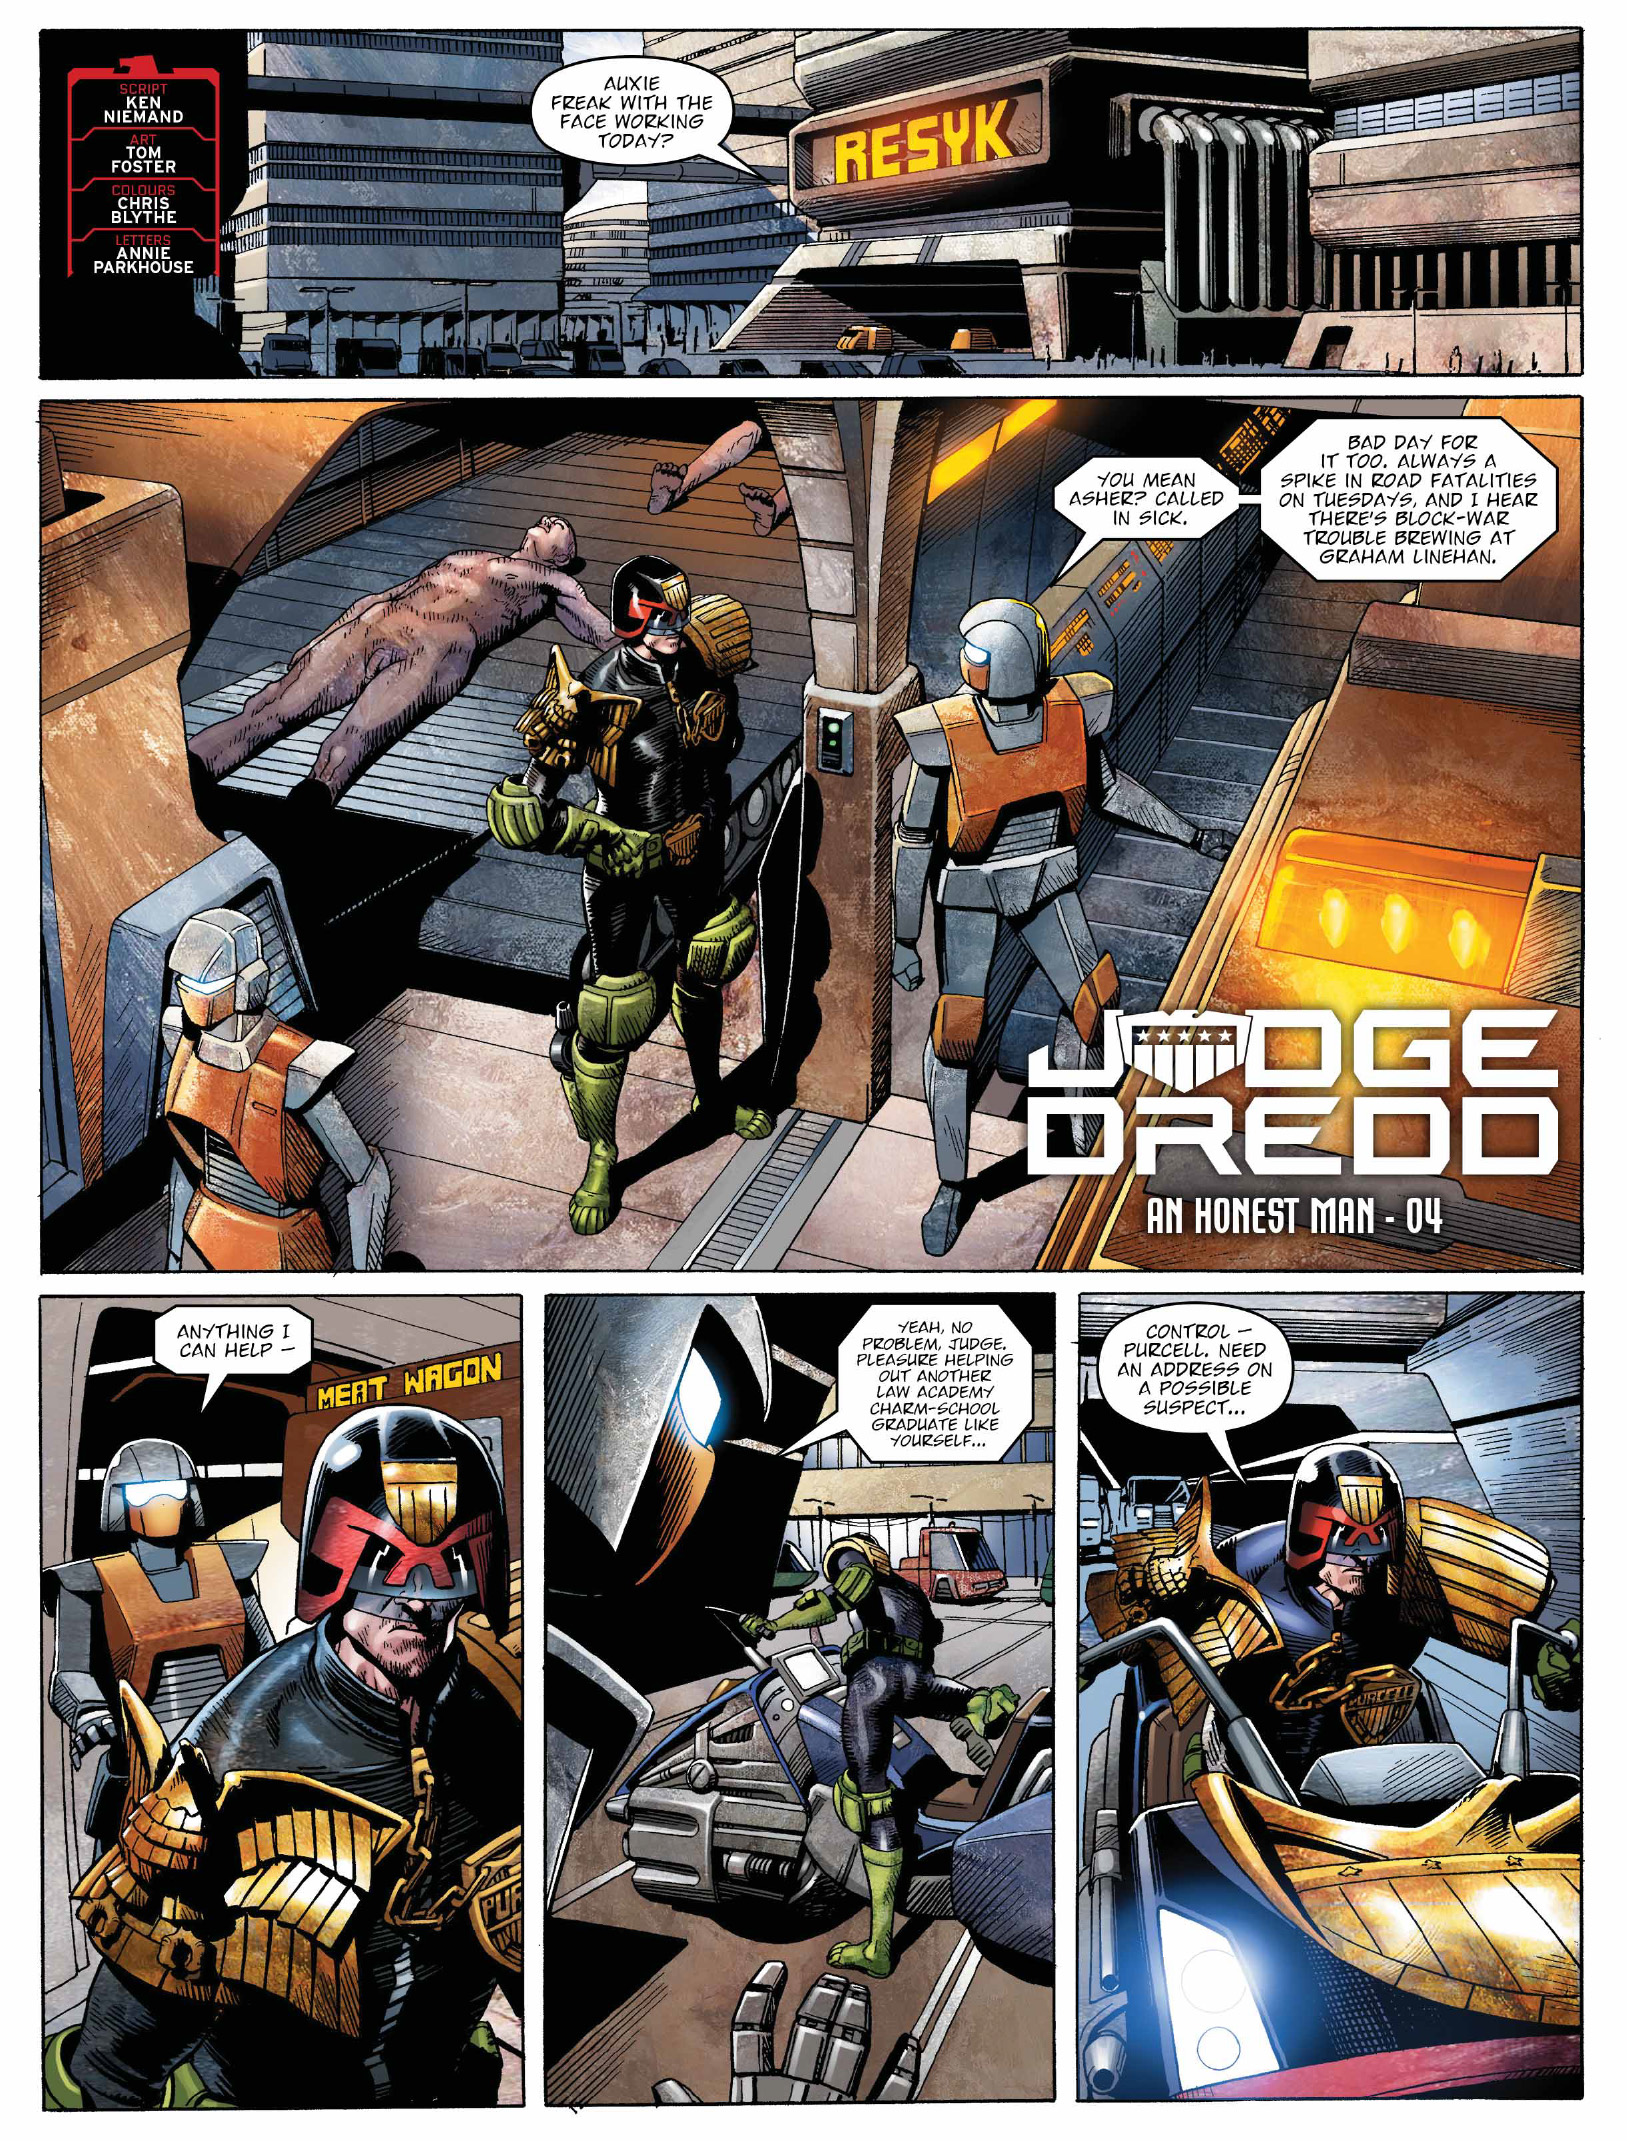 2000 AD: Chapter 2284 - Page 3